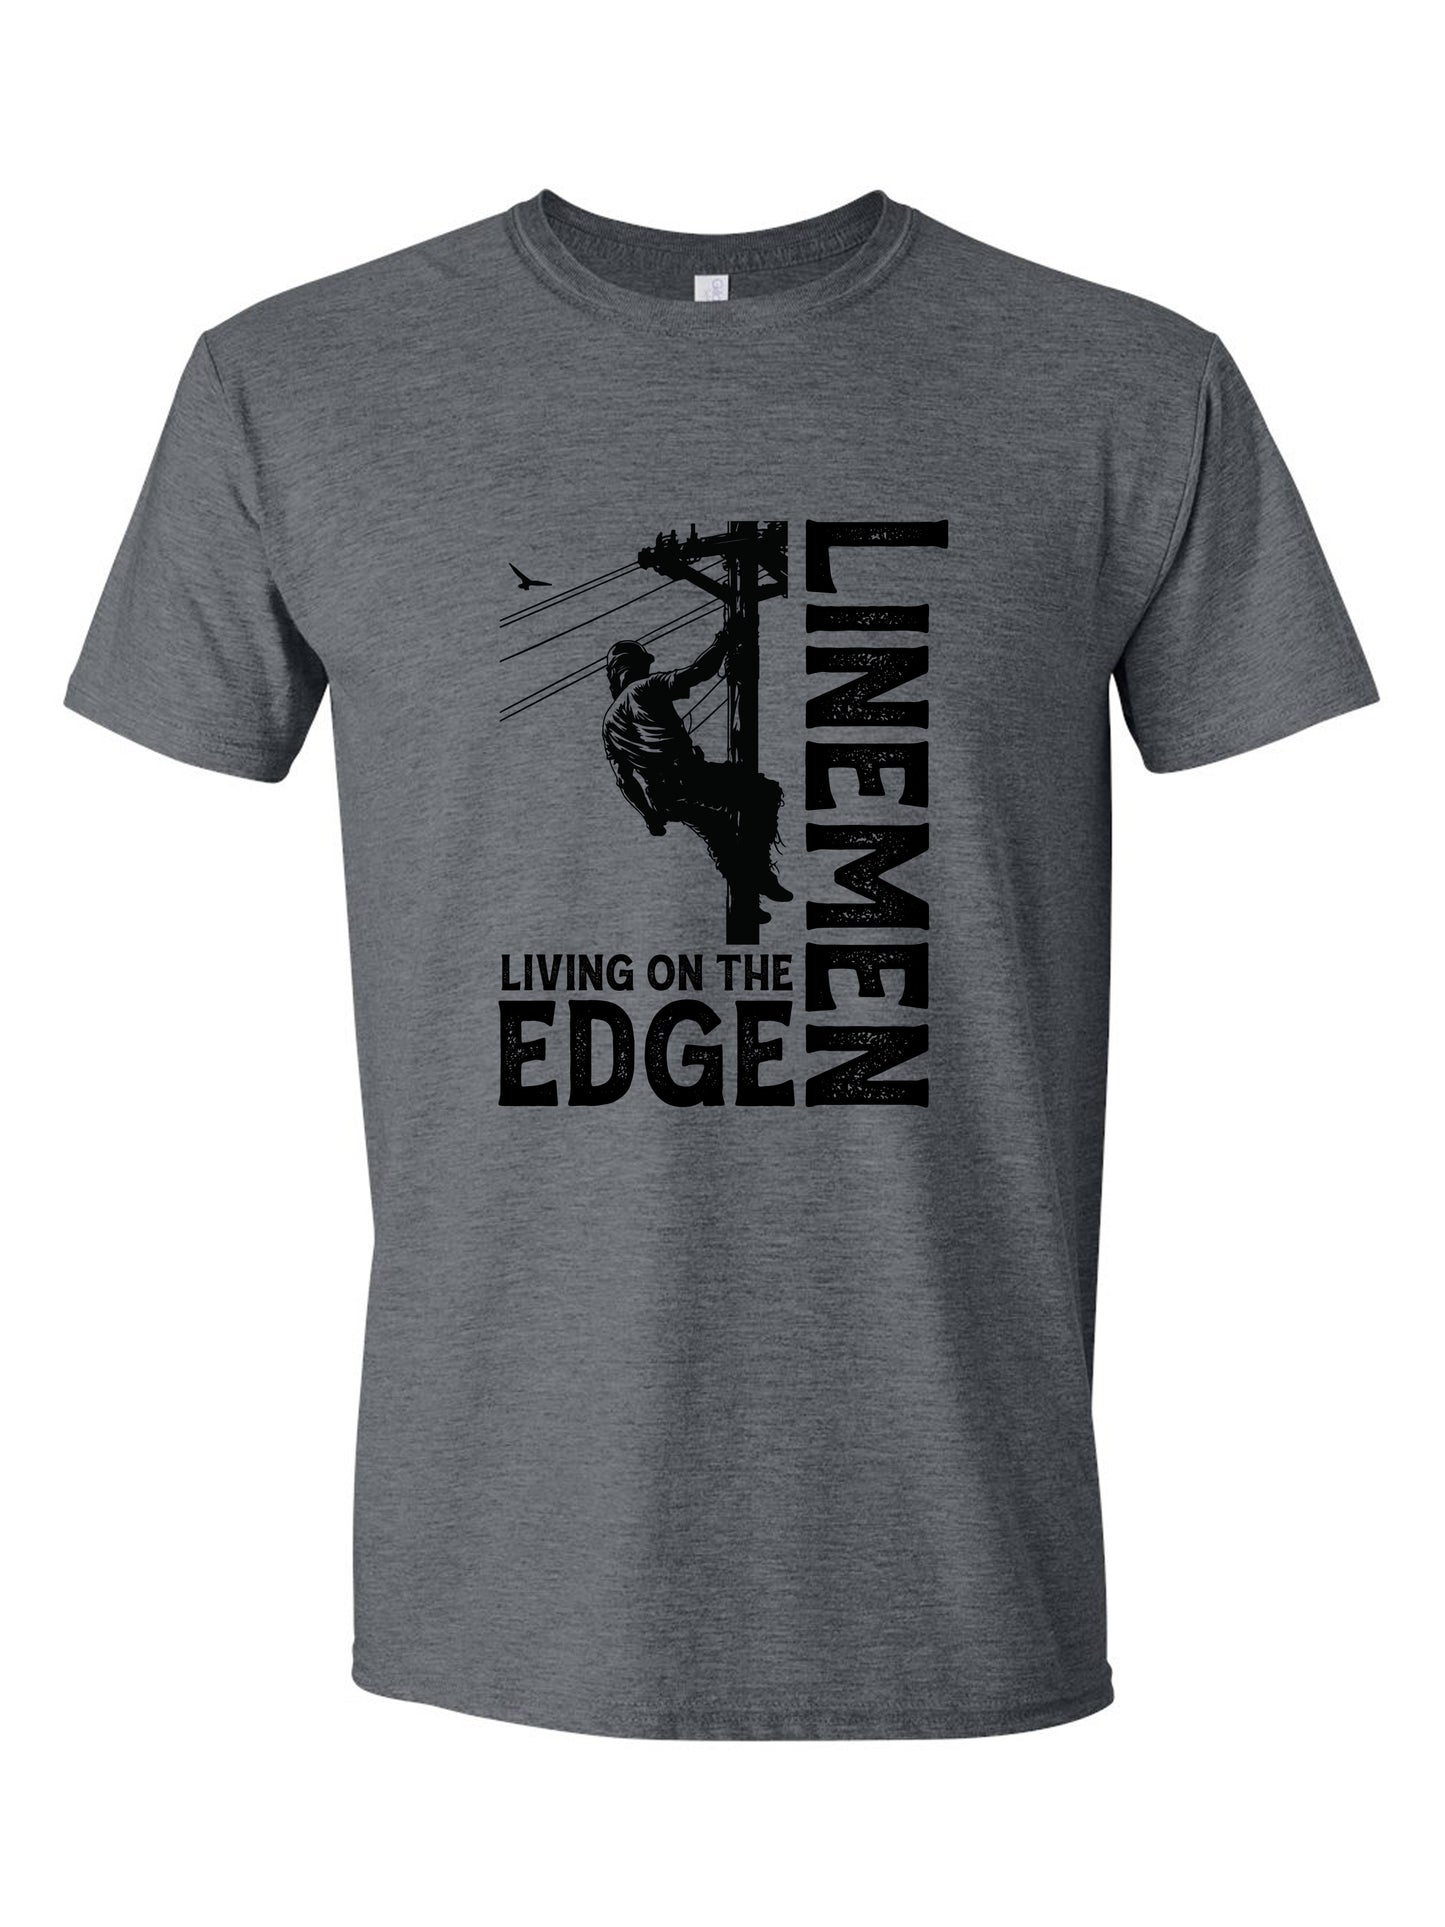 Lineman Living on the Edge - Relaxed Fit Tee - Dark Heather Grey